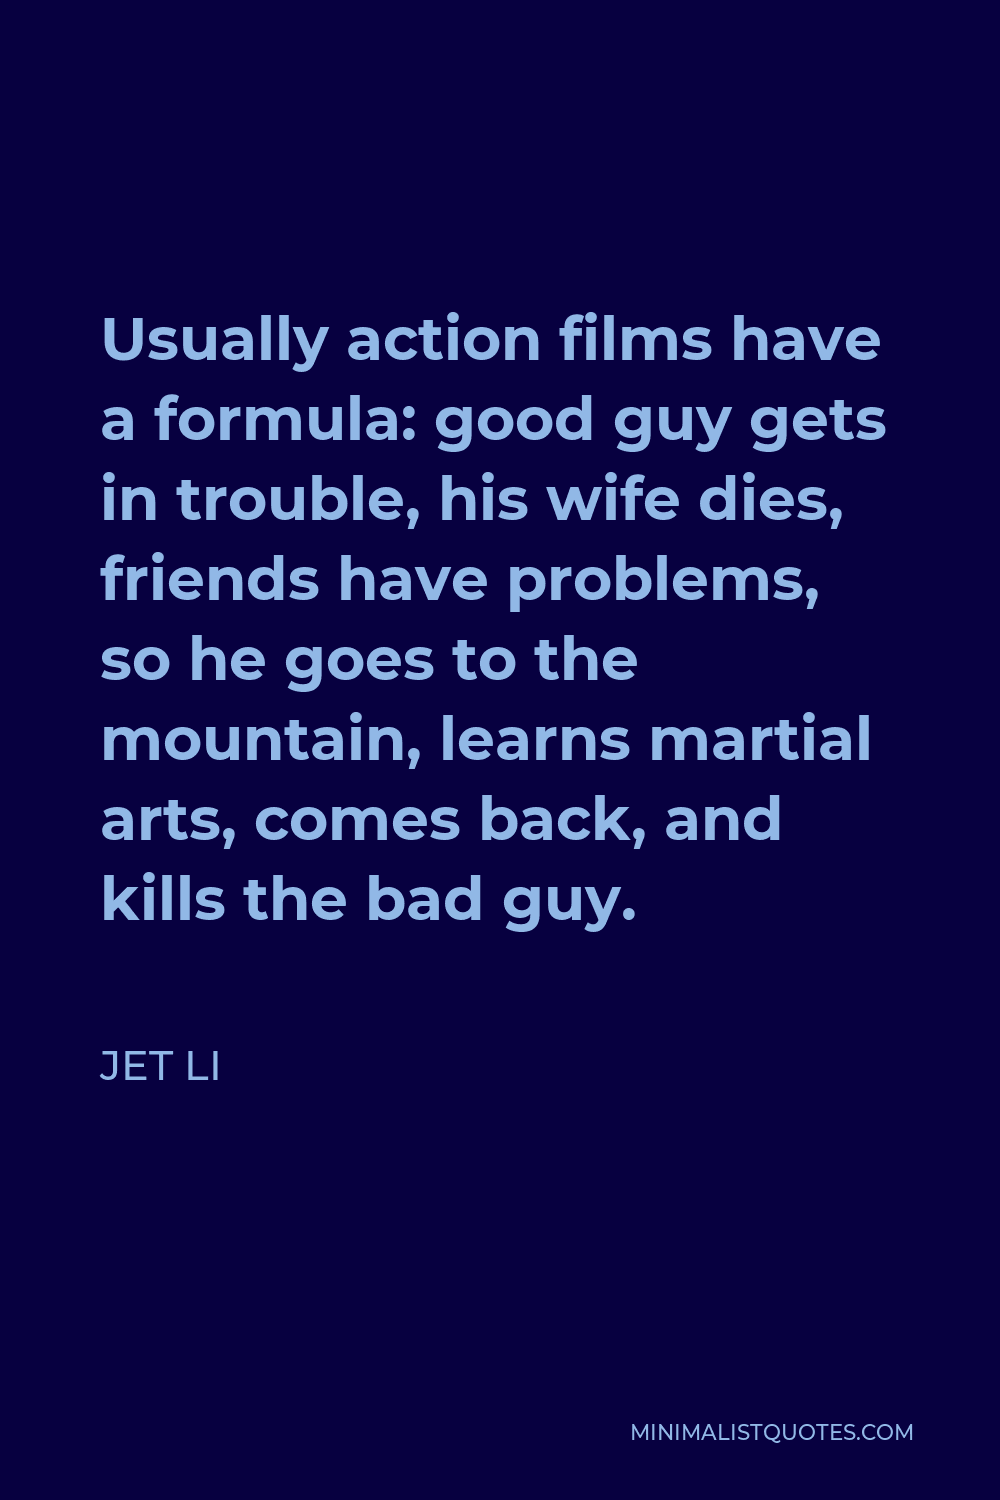 Jet Li Quote - Usually action films have a formula: good guy gets in trouble, his wife dies, friends have problems, so he goes to the mountain, learns martial arts, comes back, and kills the bad guy.